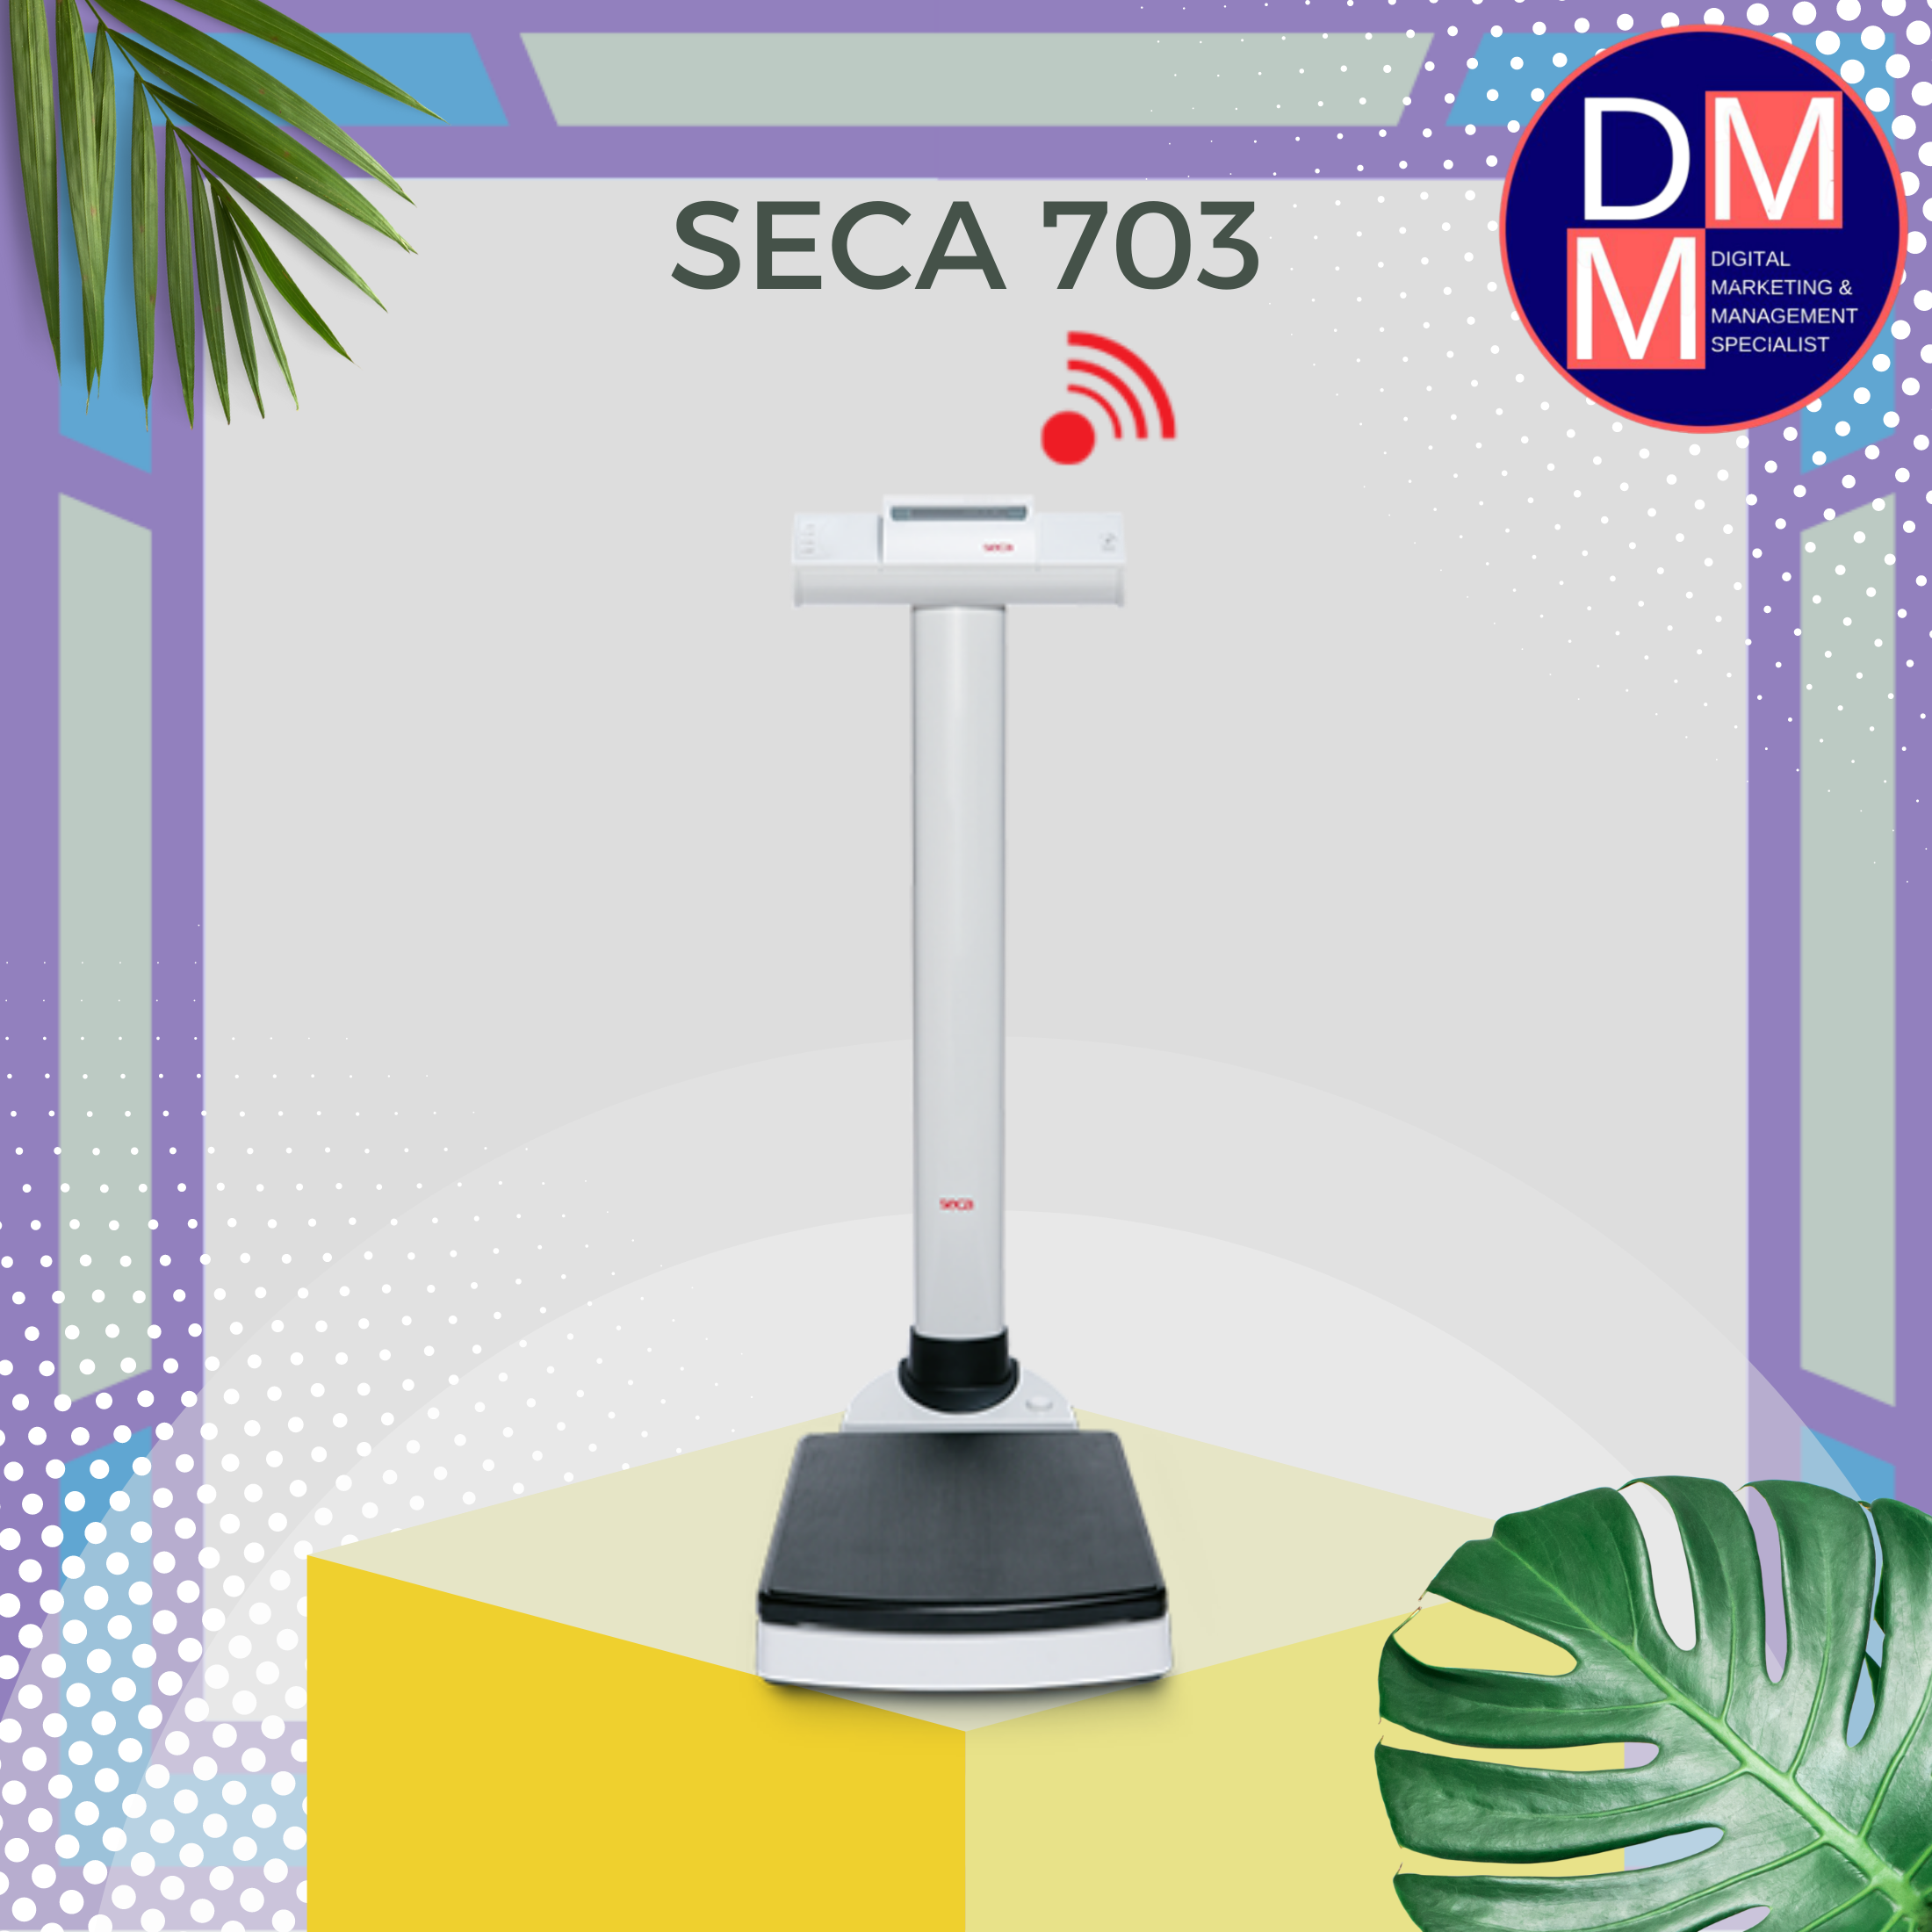 SECA 703 s - Wireless column scale with integrated measuring rod